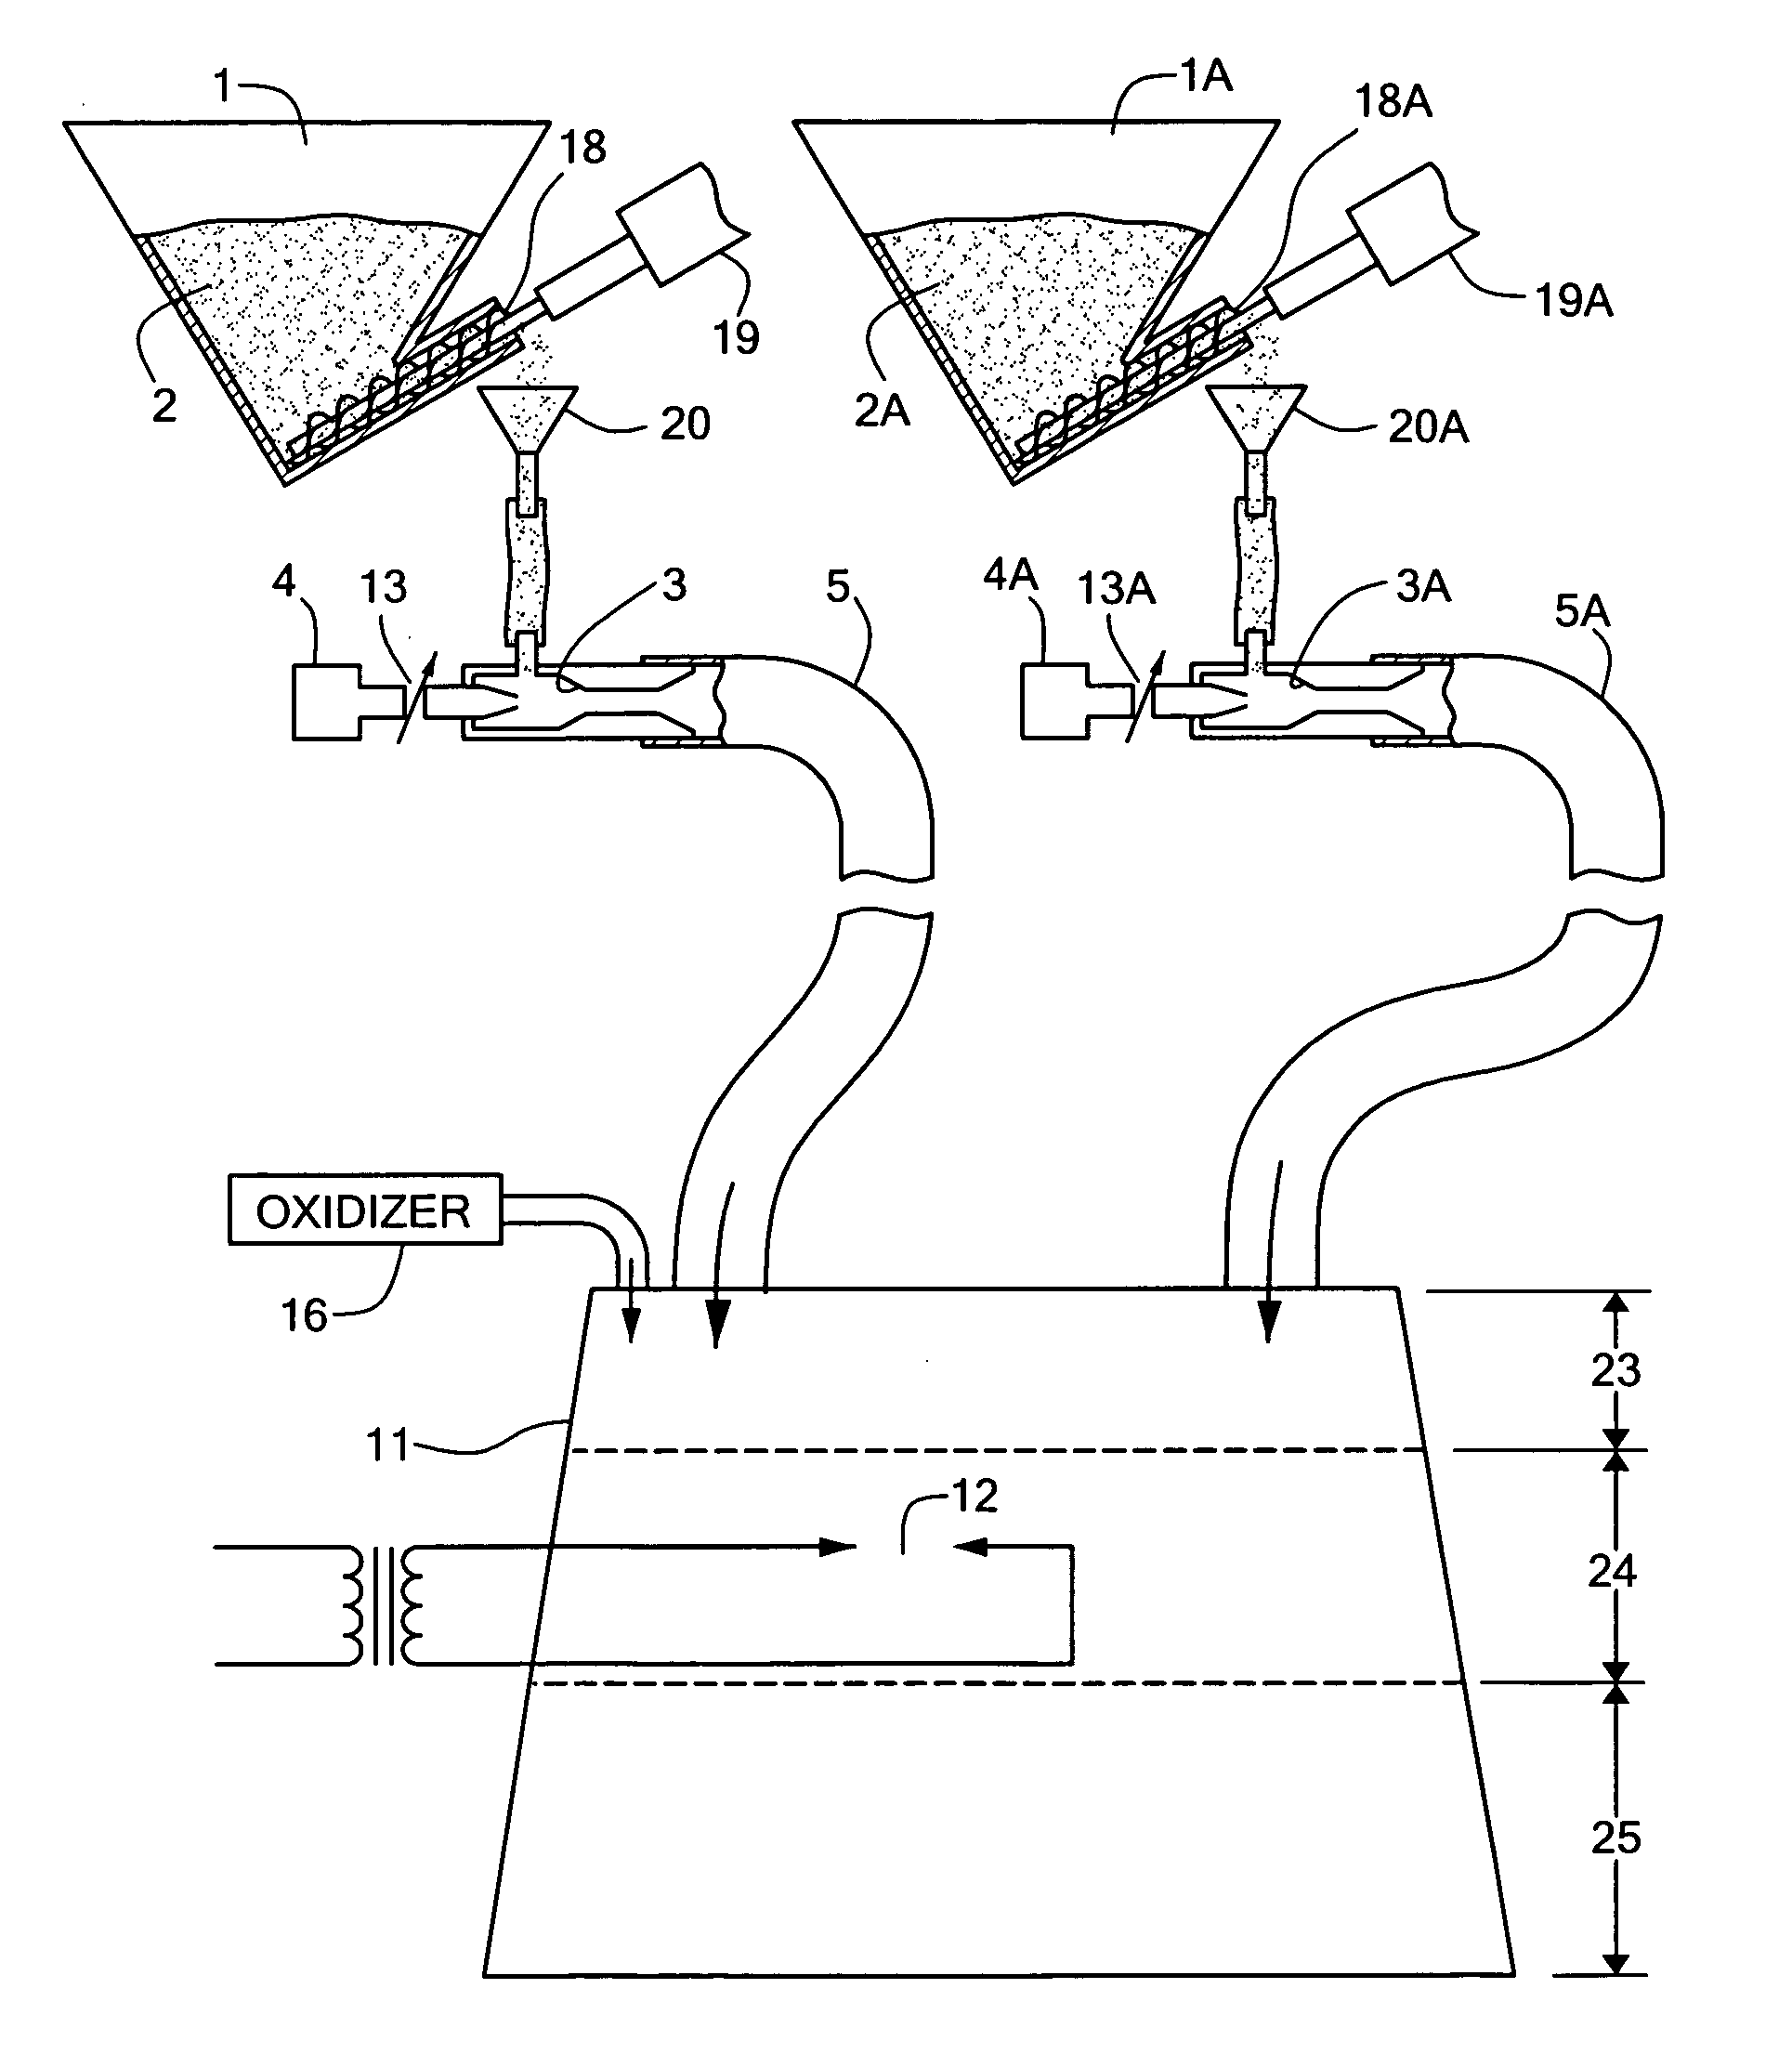 Flame spraying process and apparatus